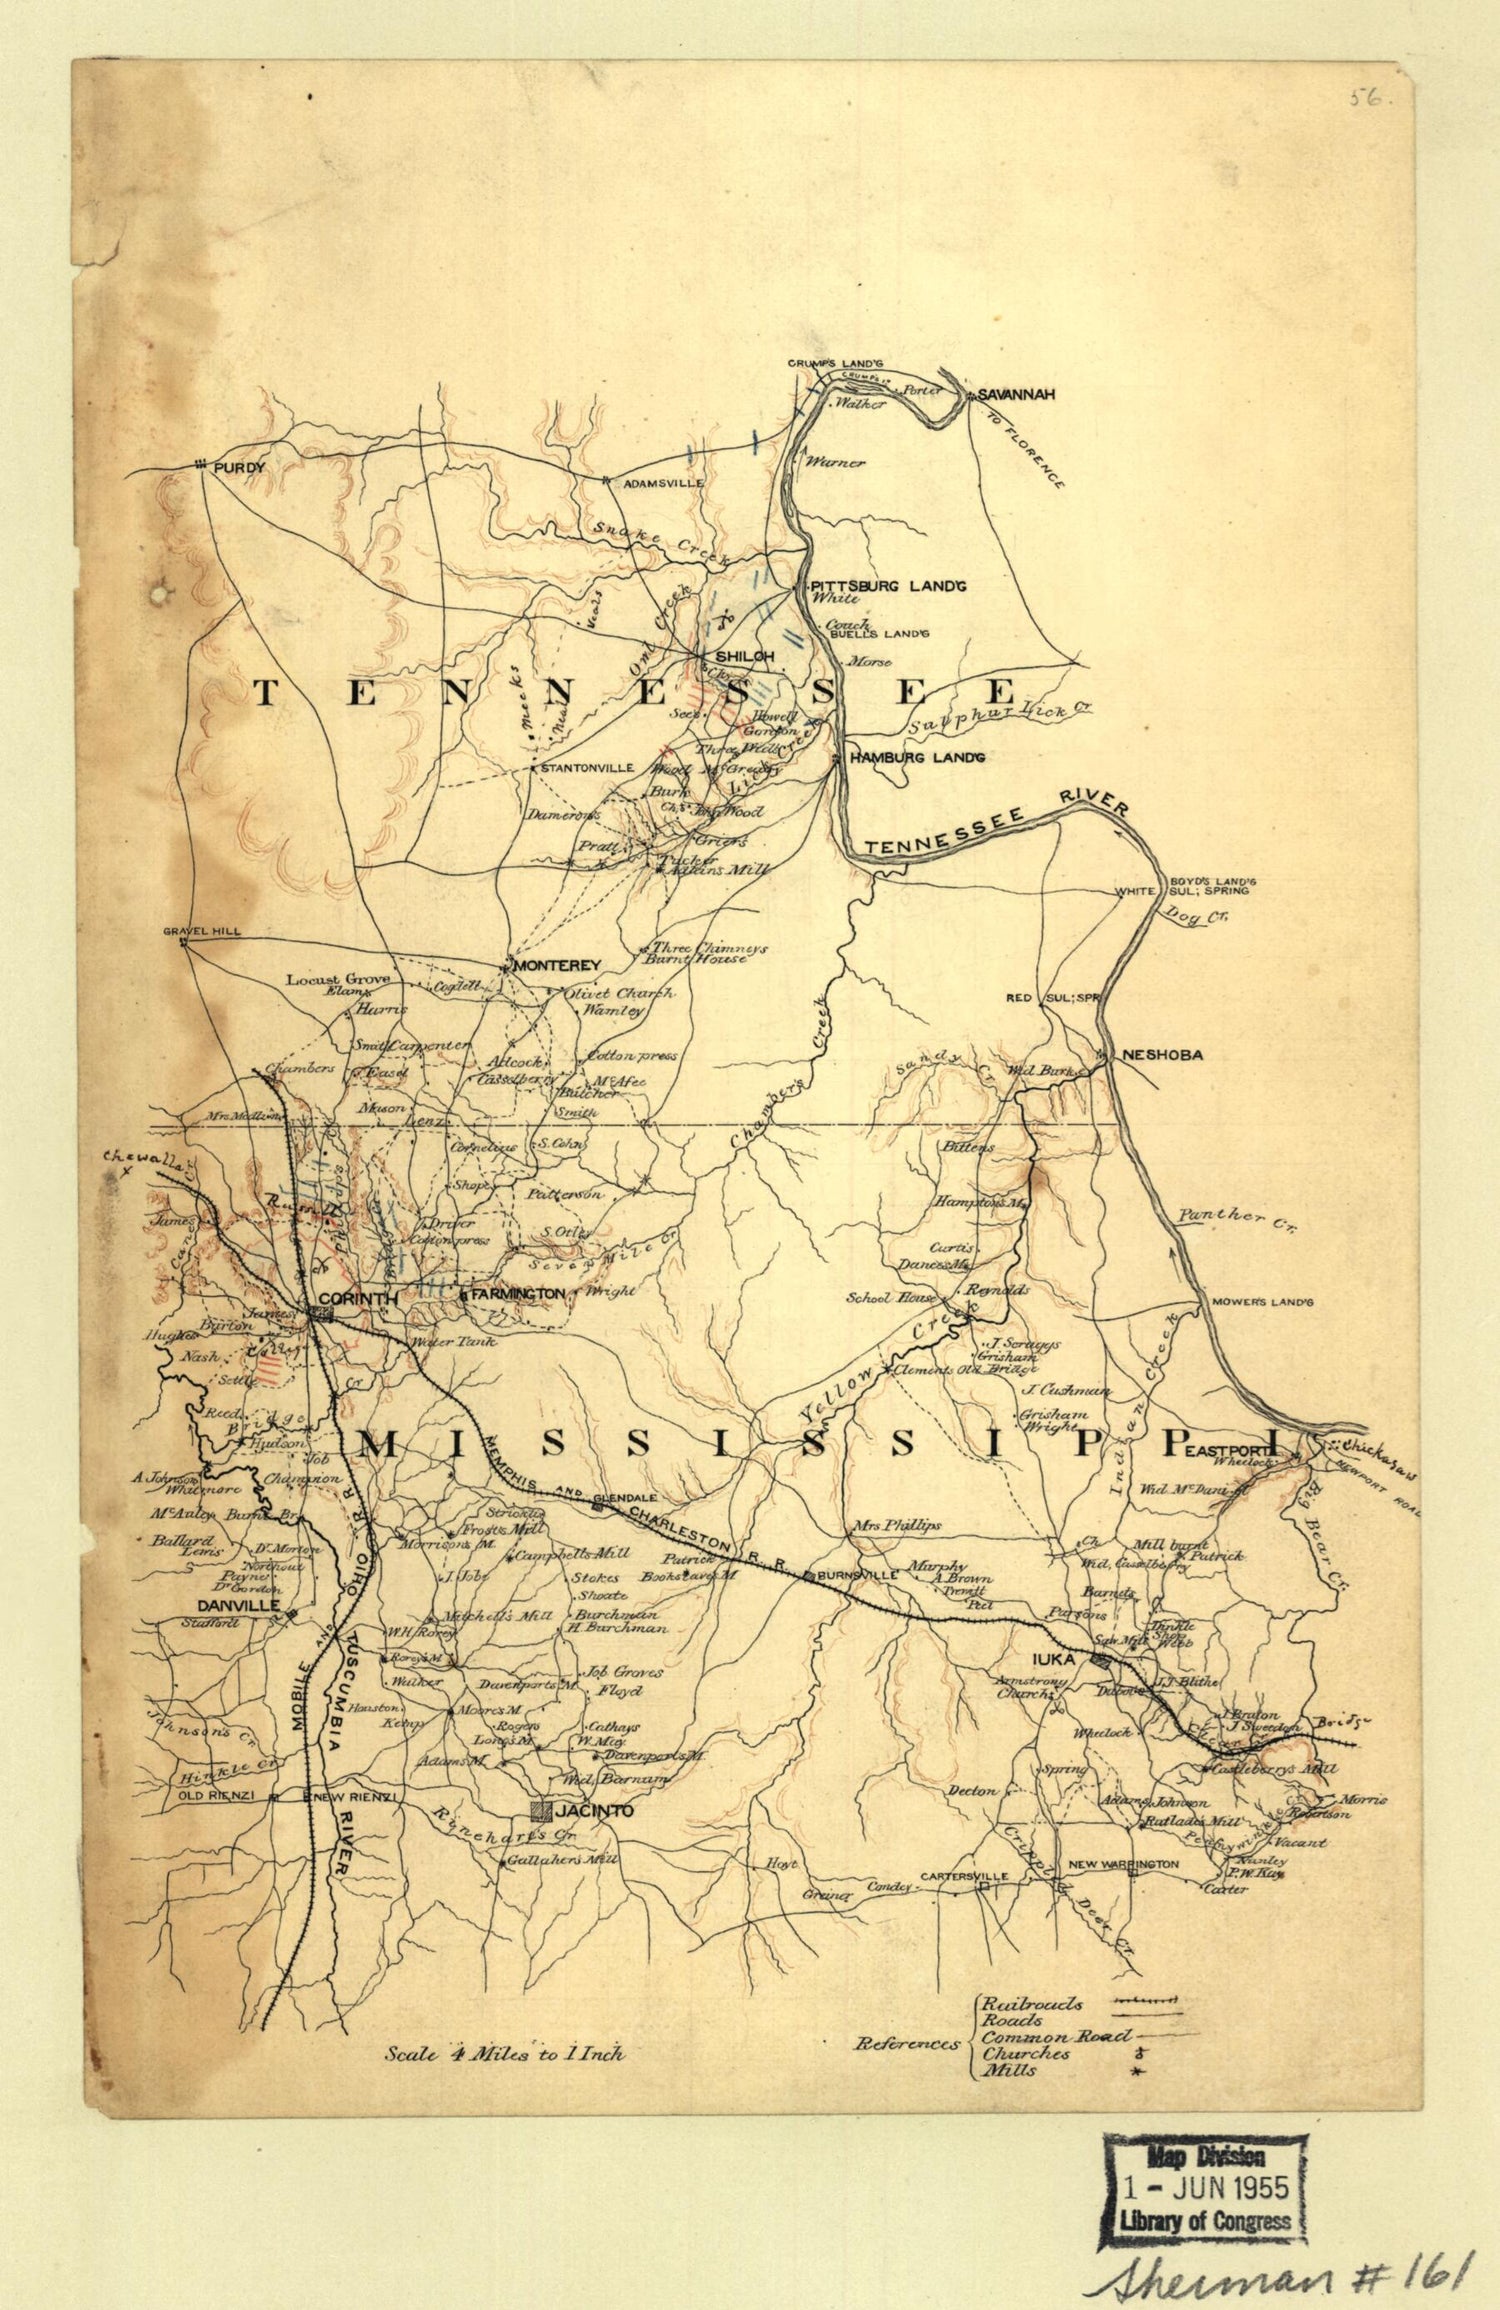 This old map of Map of Part of the Counties of McNairy and Hardin, Tennessee, and Alcorn and Tishomingo, Mississippi. from 1862 was created by G. A. Lyell in 1862